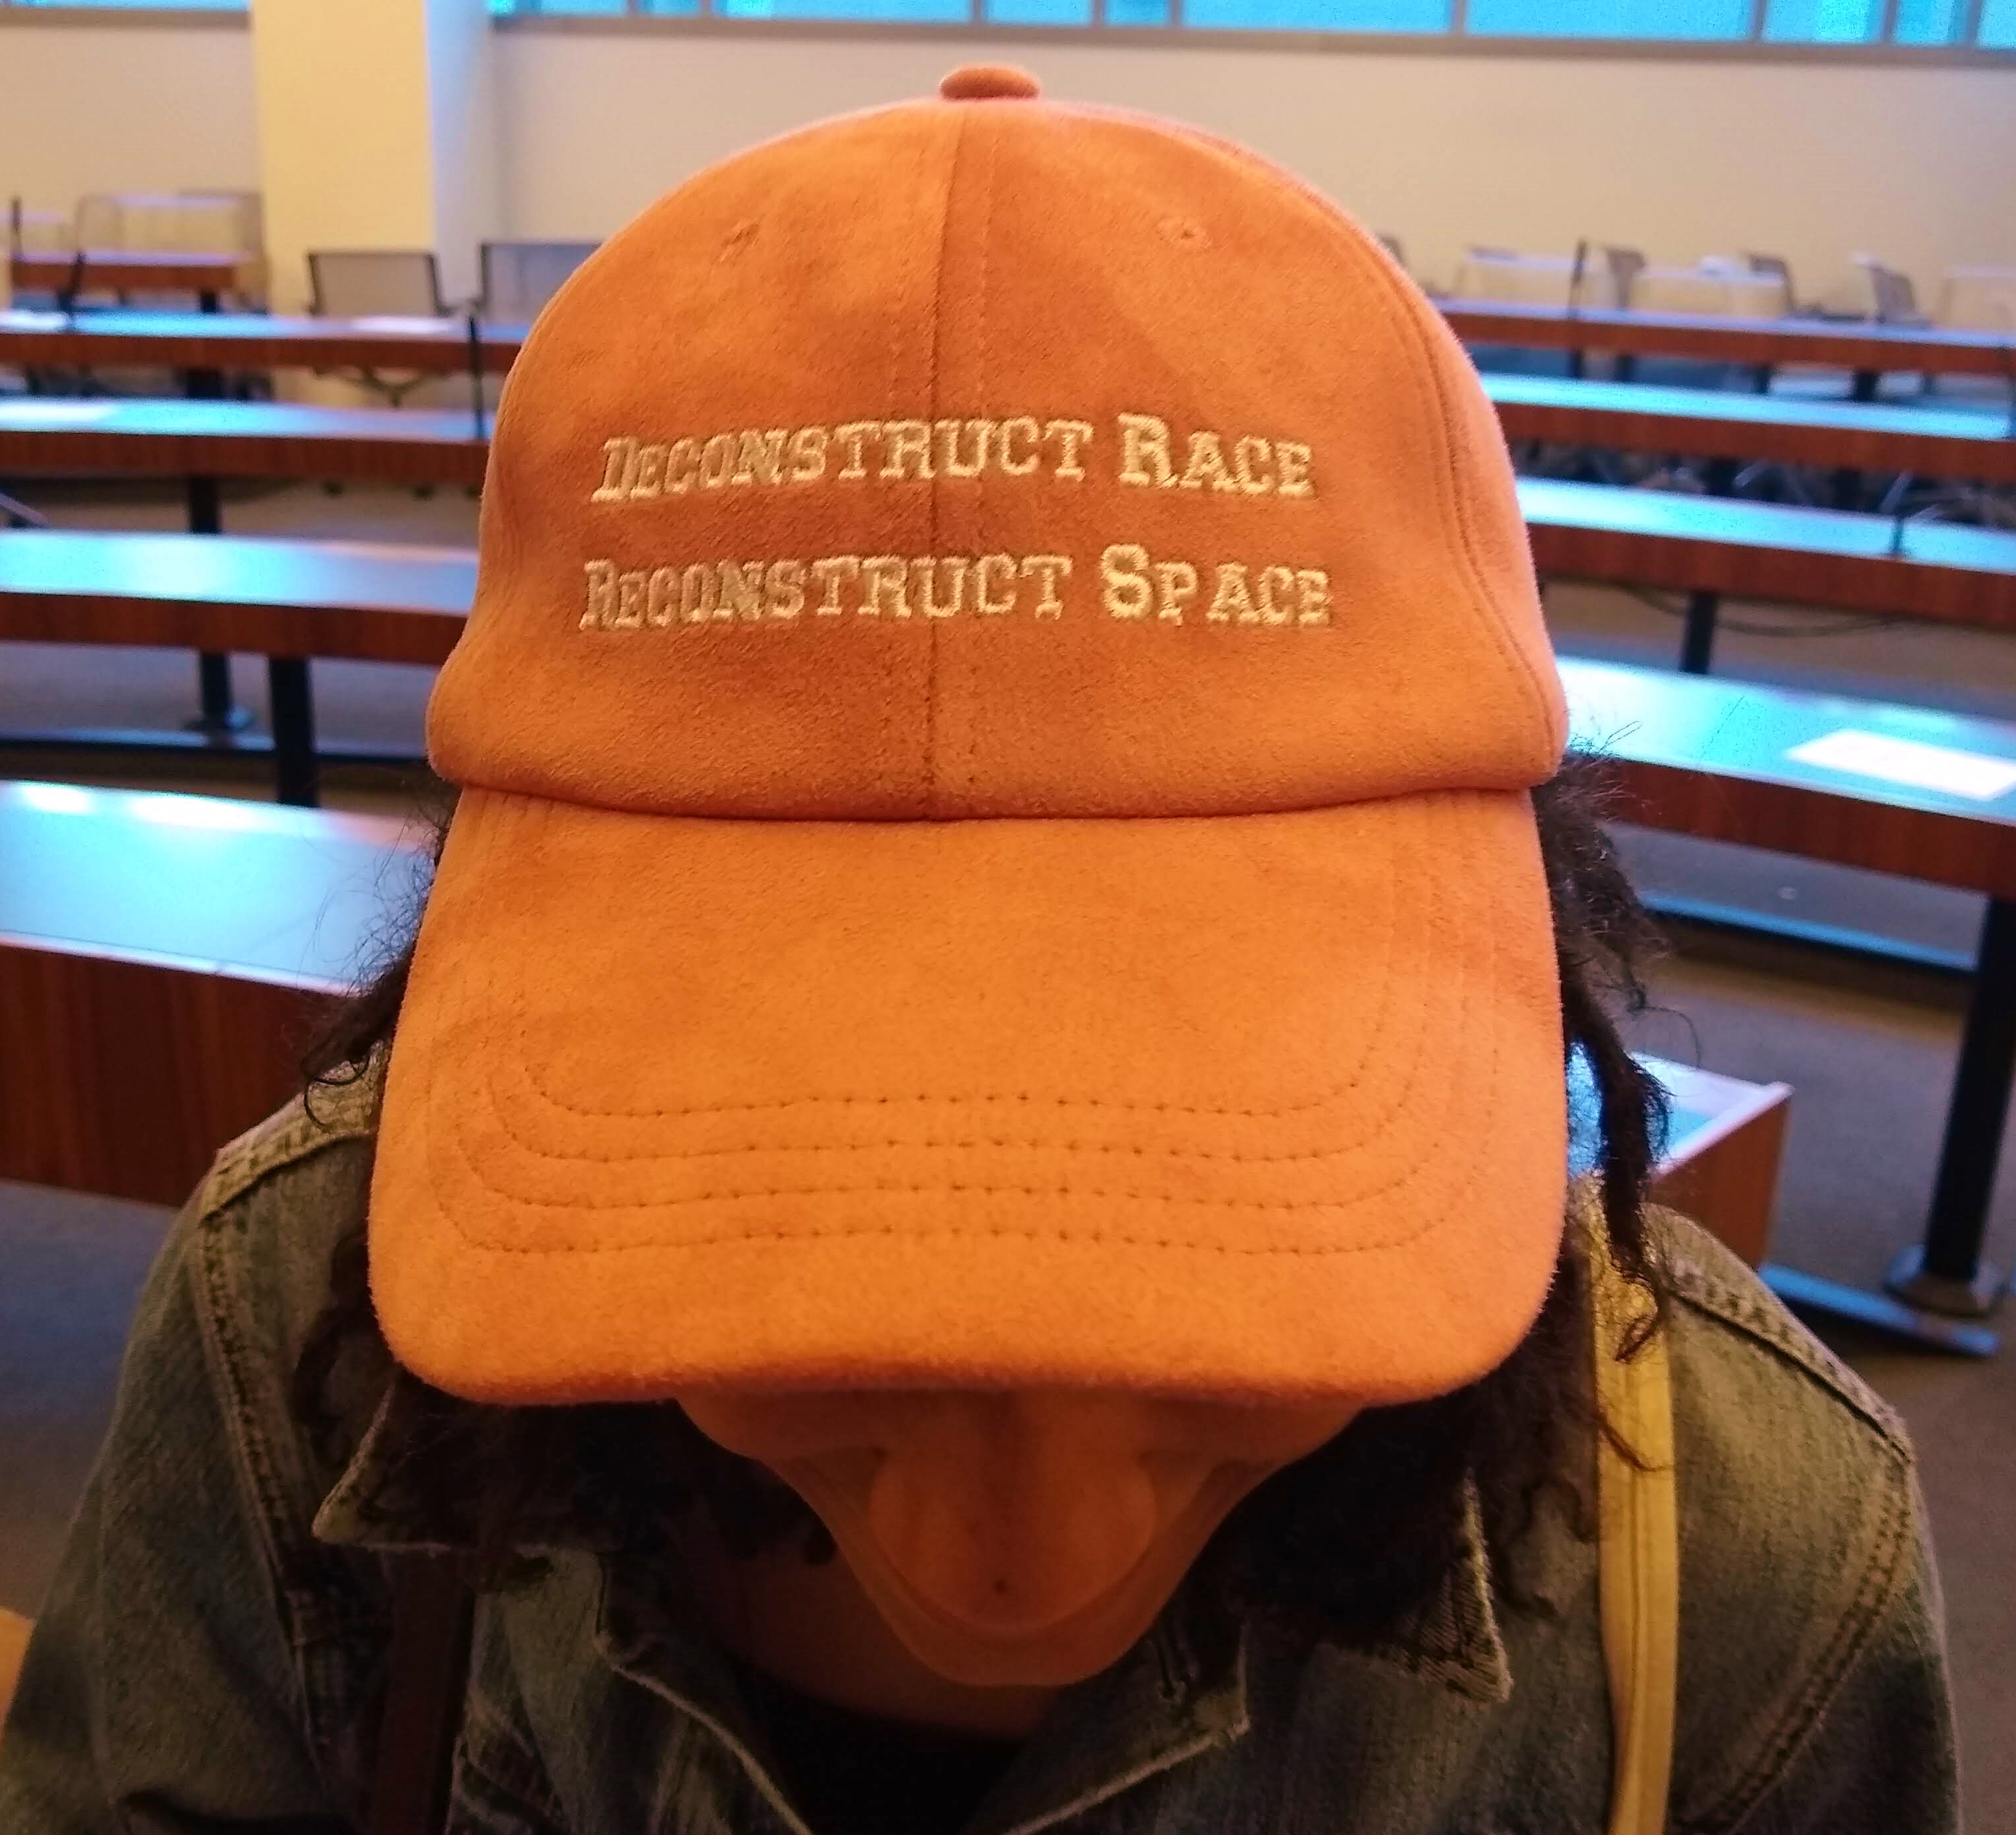 A woman wearing an orange baseball hat that reads, "Deconstruct race.  Reconstruct space."